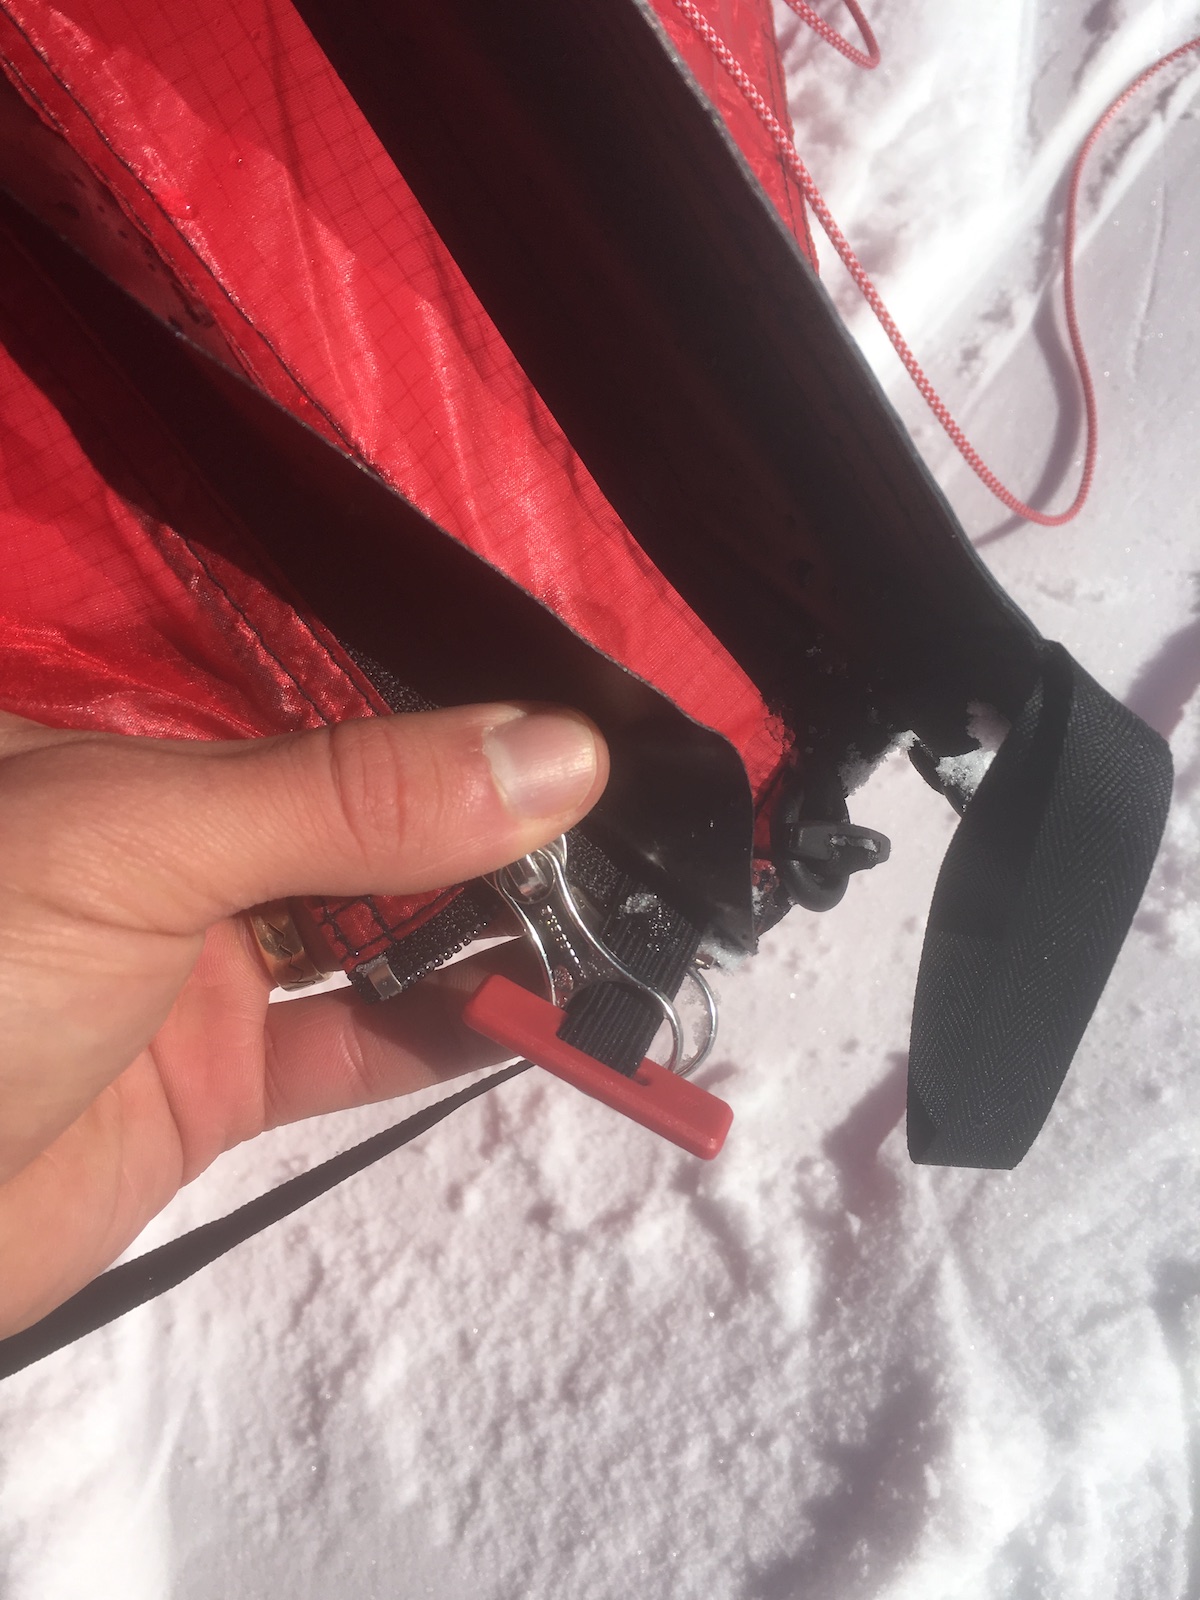 Nifty elastic toggle to keep the zippers shut in wind. [Photo] Drew Thayer